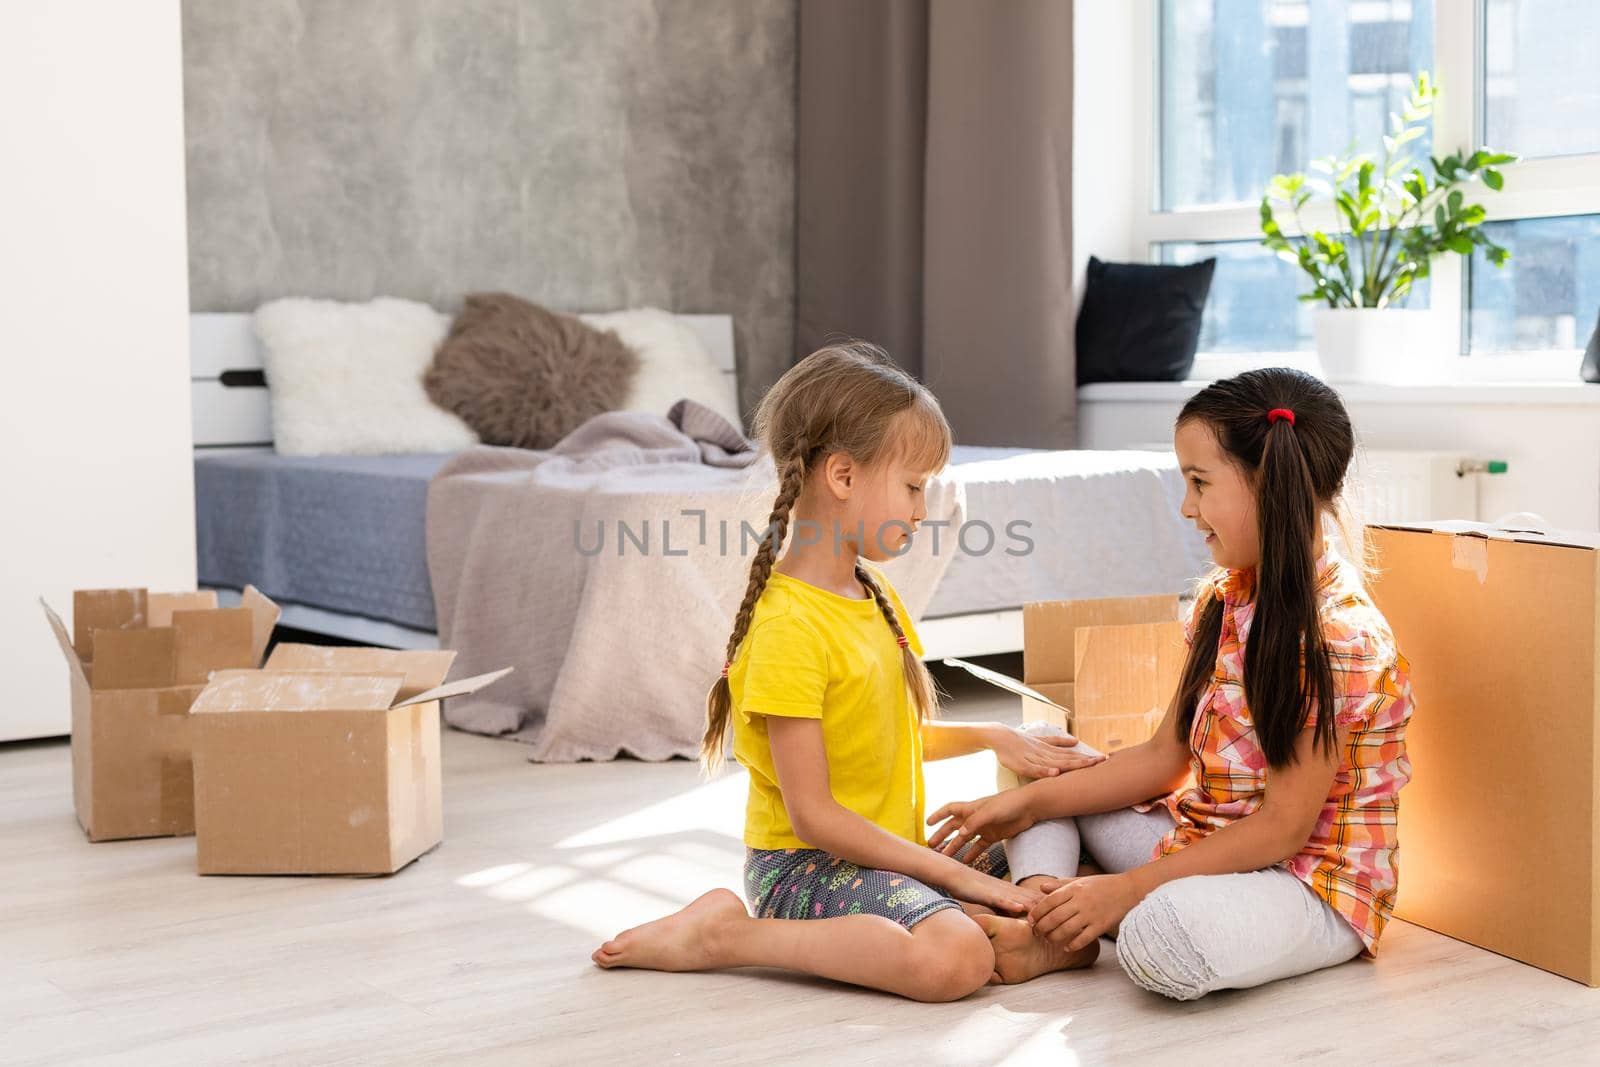 Excited funny kids girls running inside luxury big modern house on moving day, cute children entering exploring new home, happy young family buying real estate